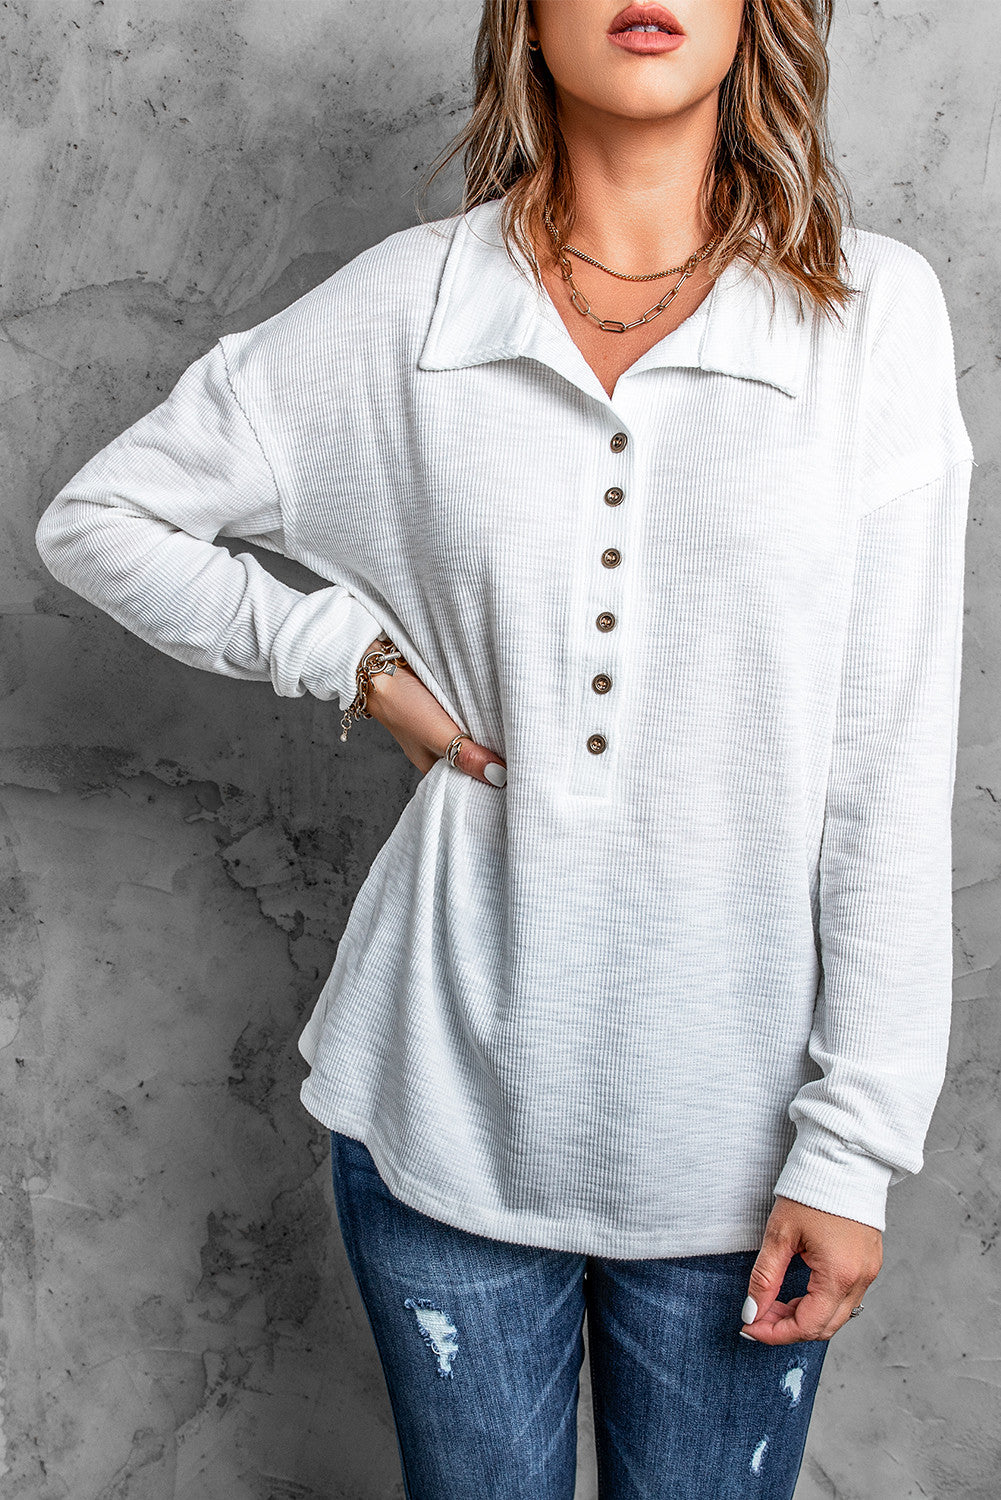 Button Front Turn-down Neck Knit Top